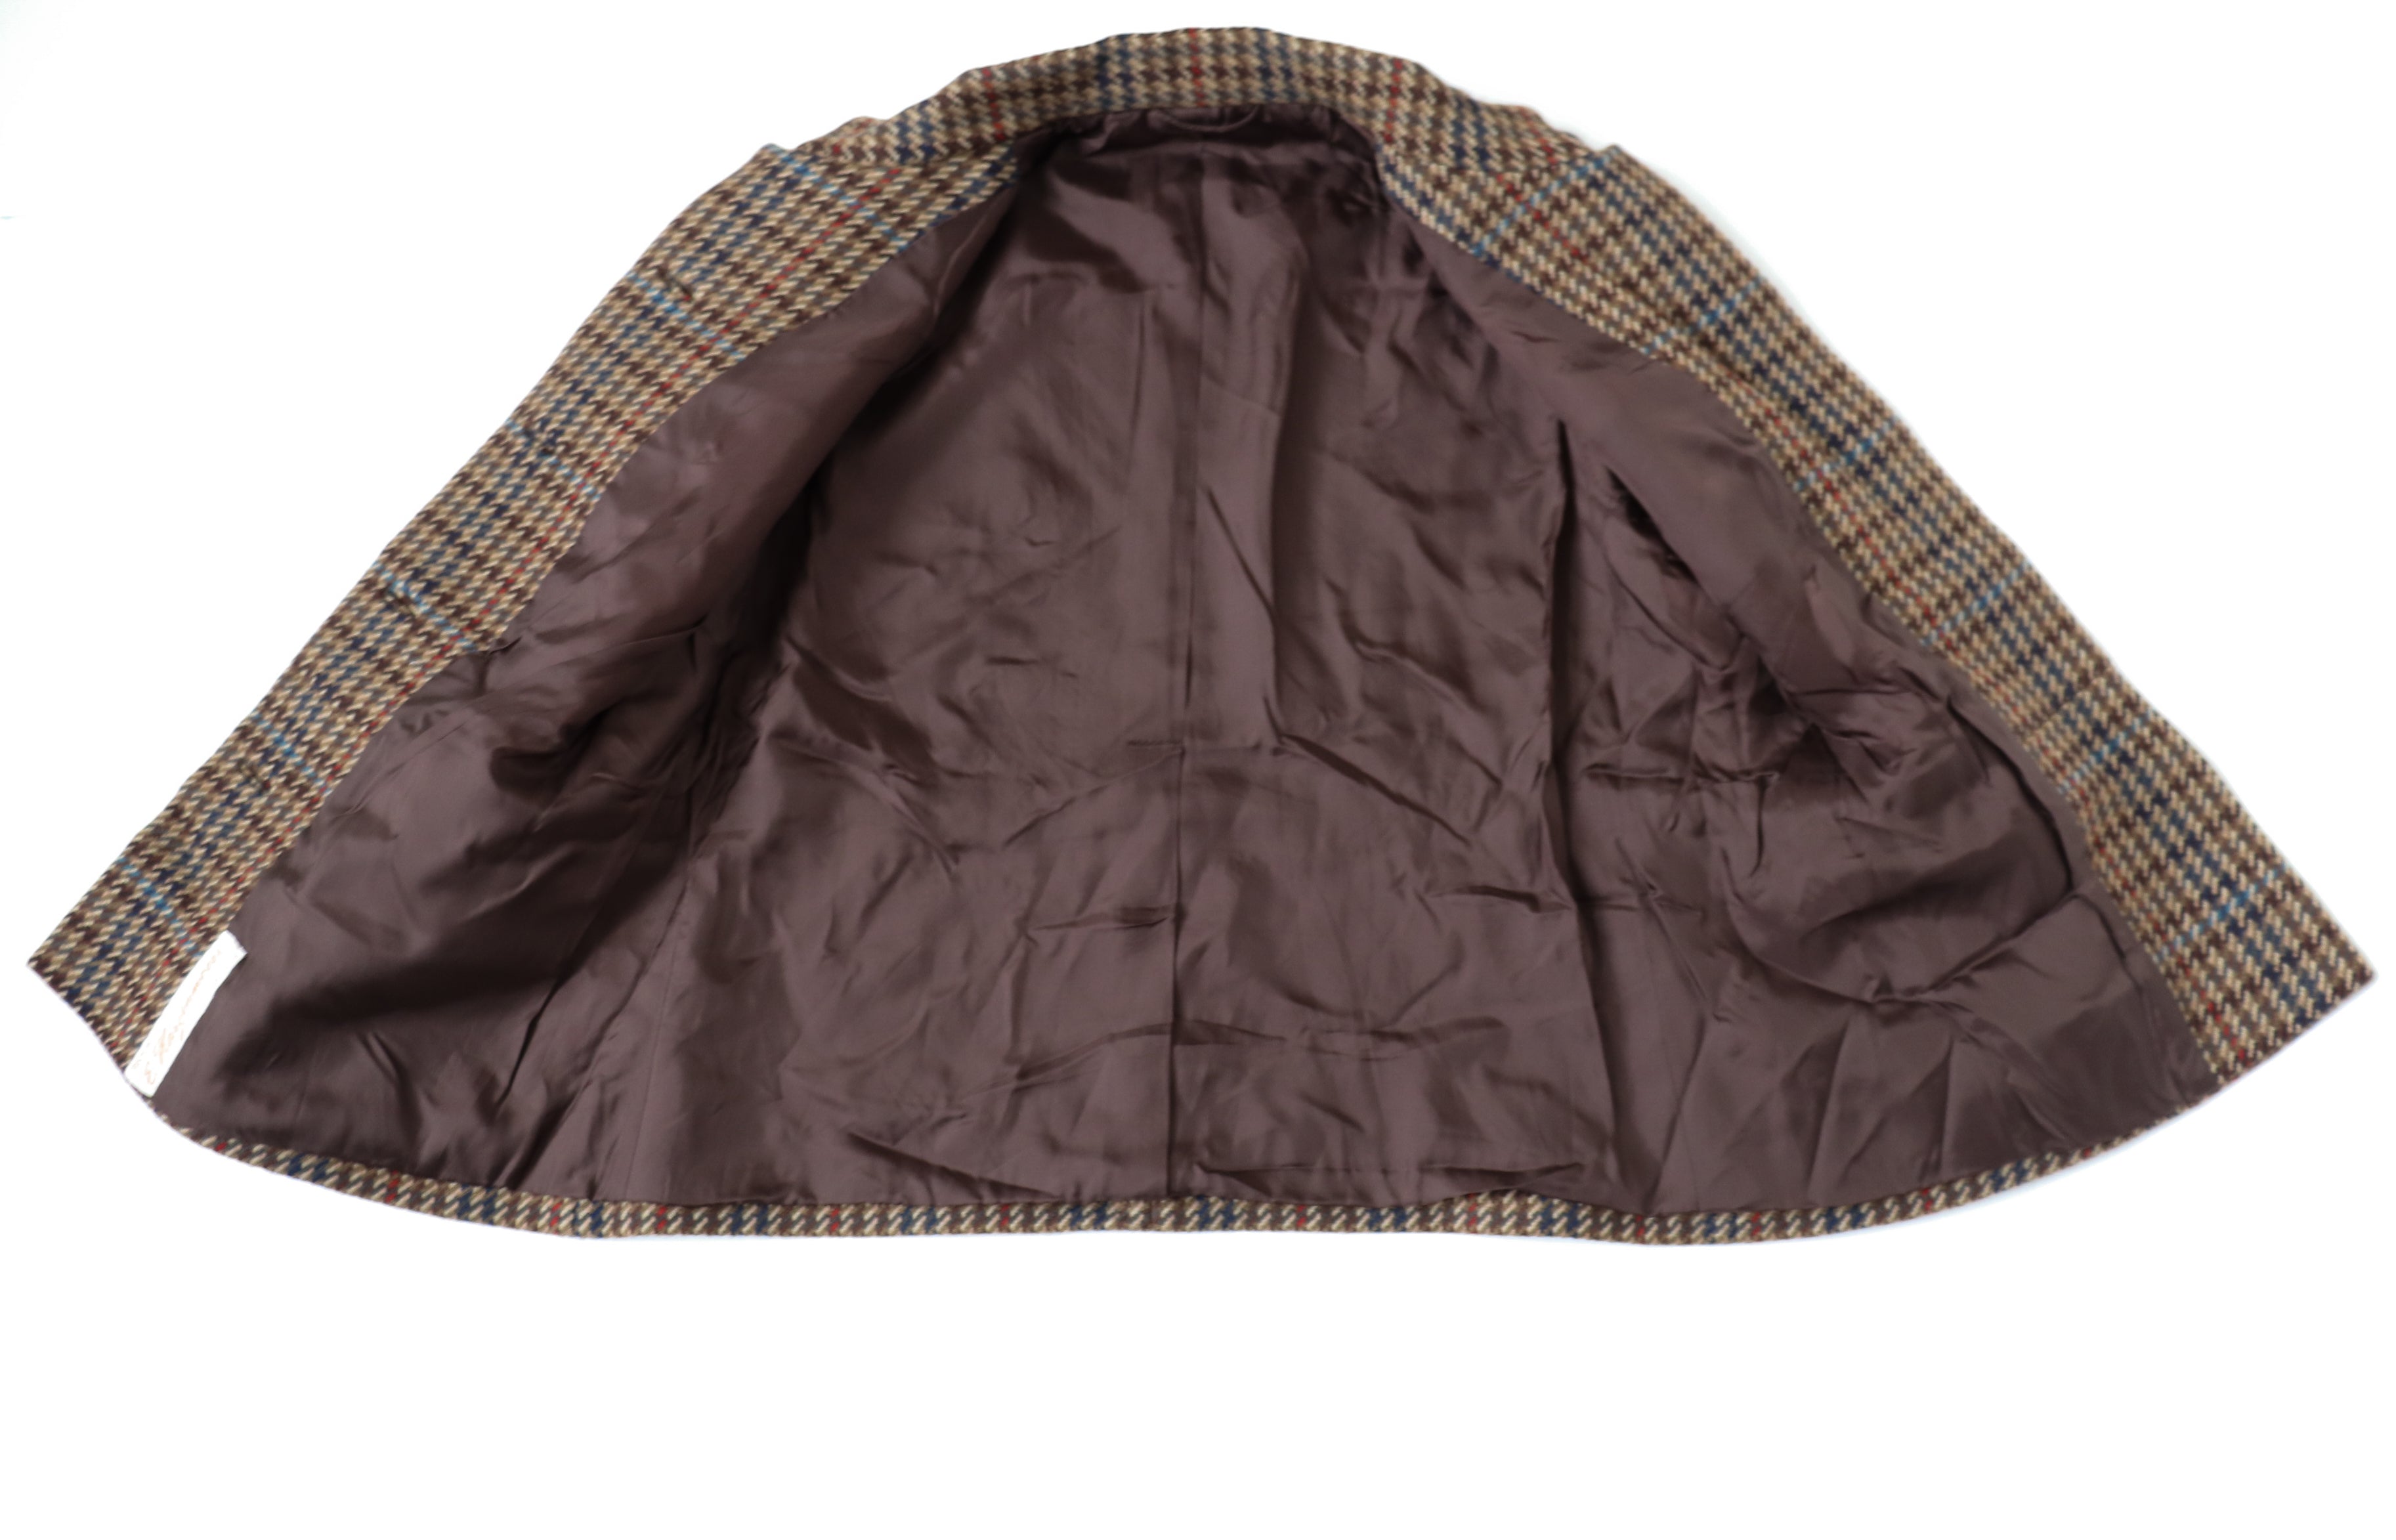 Brown Checked Wool Vintage Jacket - Couture Harzenmoser - M / UK 12